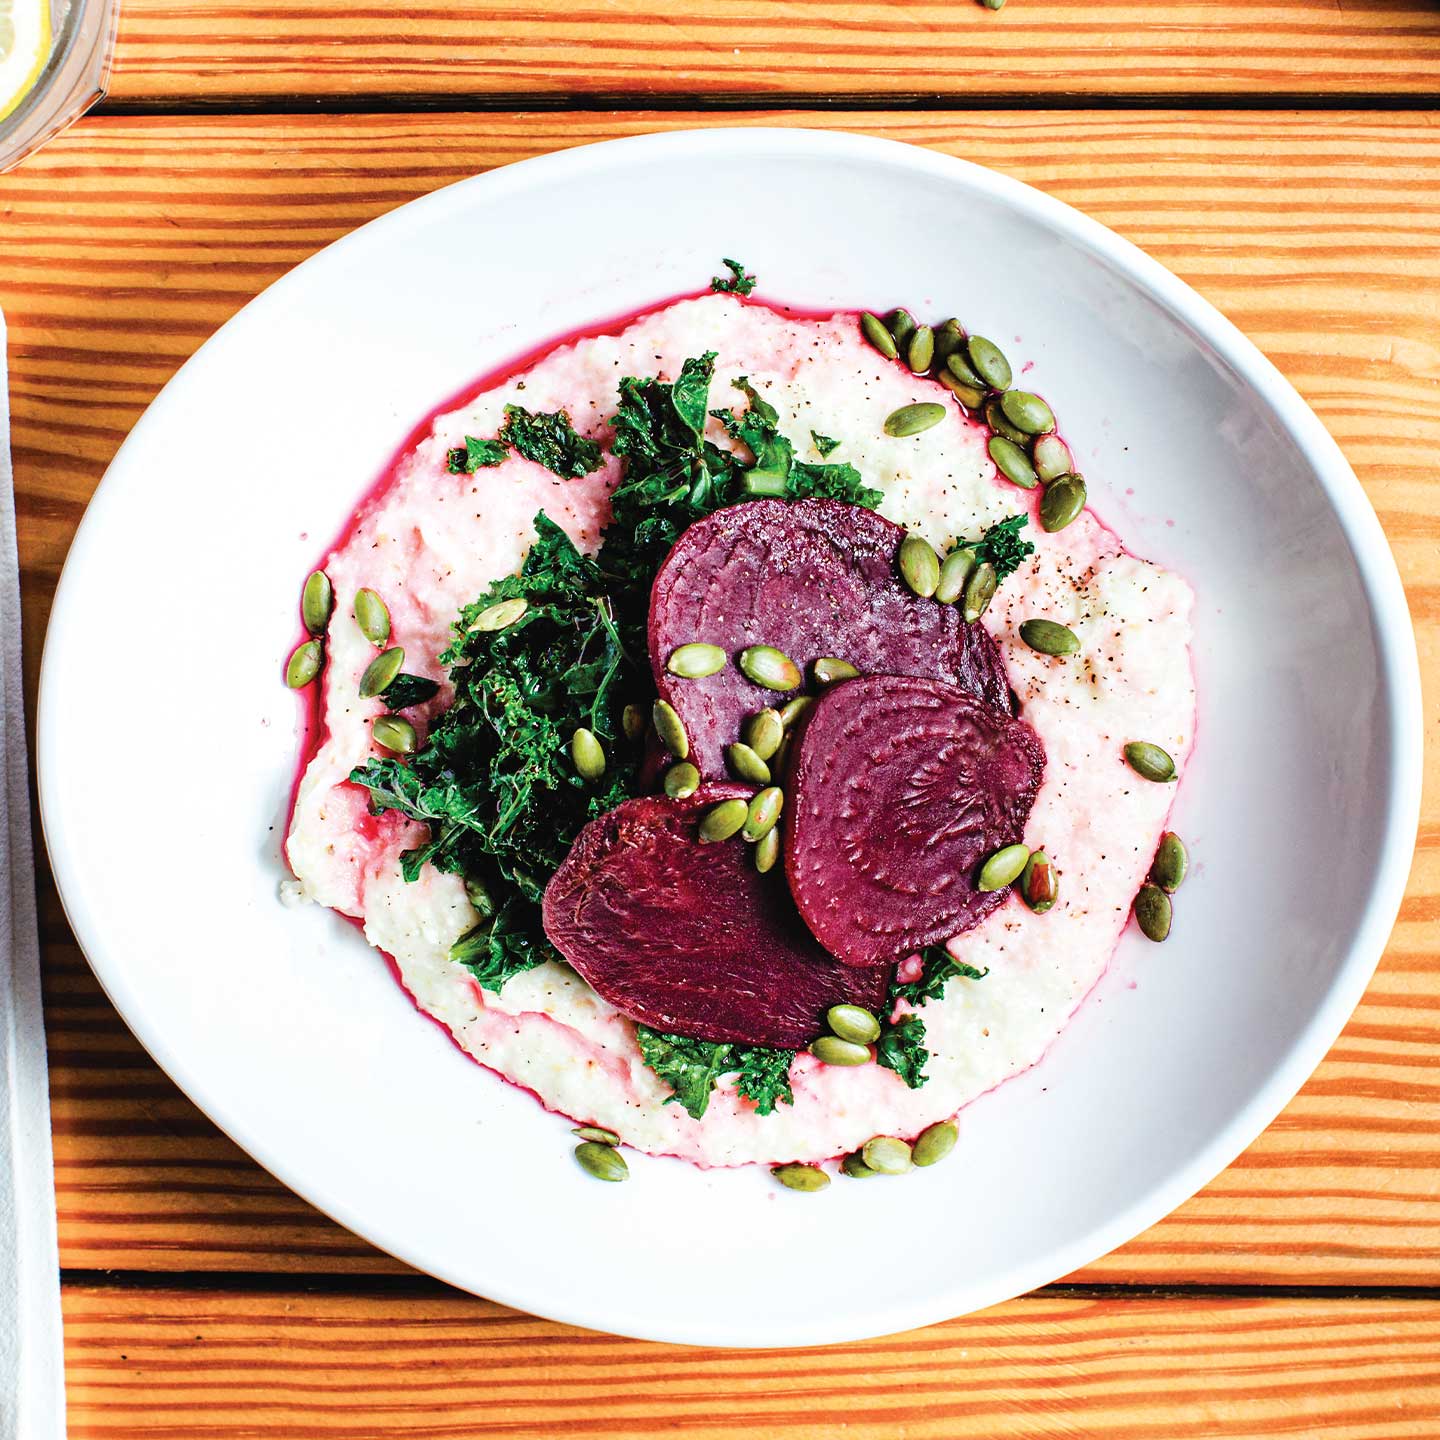 The Daily Ration's "Drop the Beet" Bowl